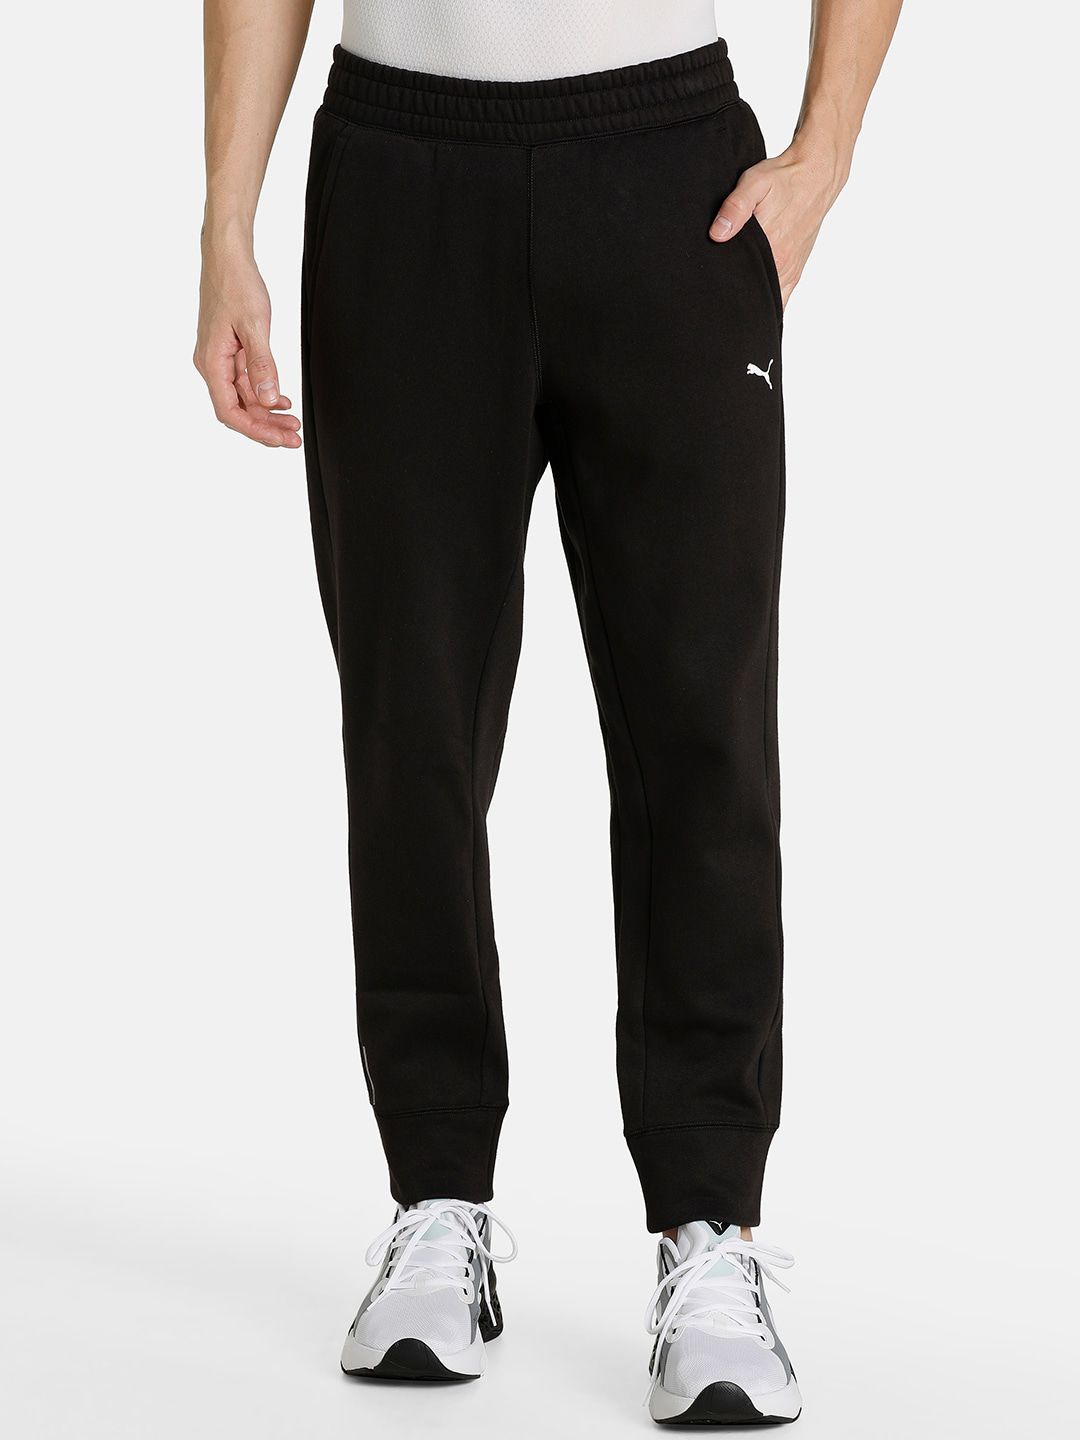 Puma Black Solid Track Pants Price in India